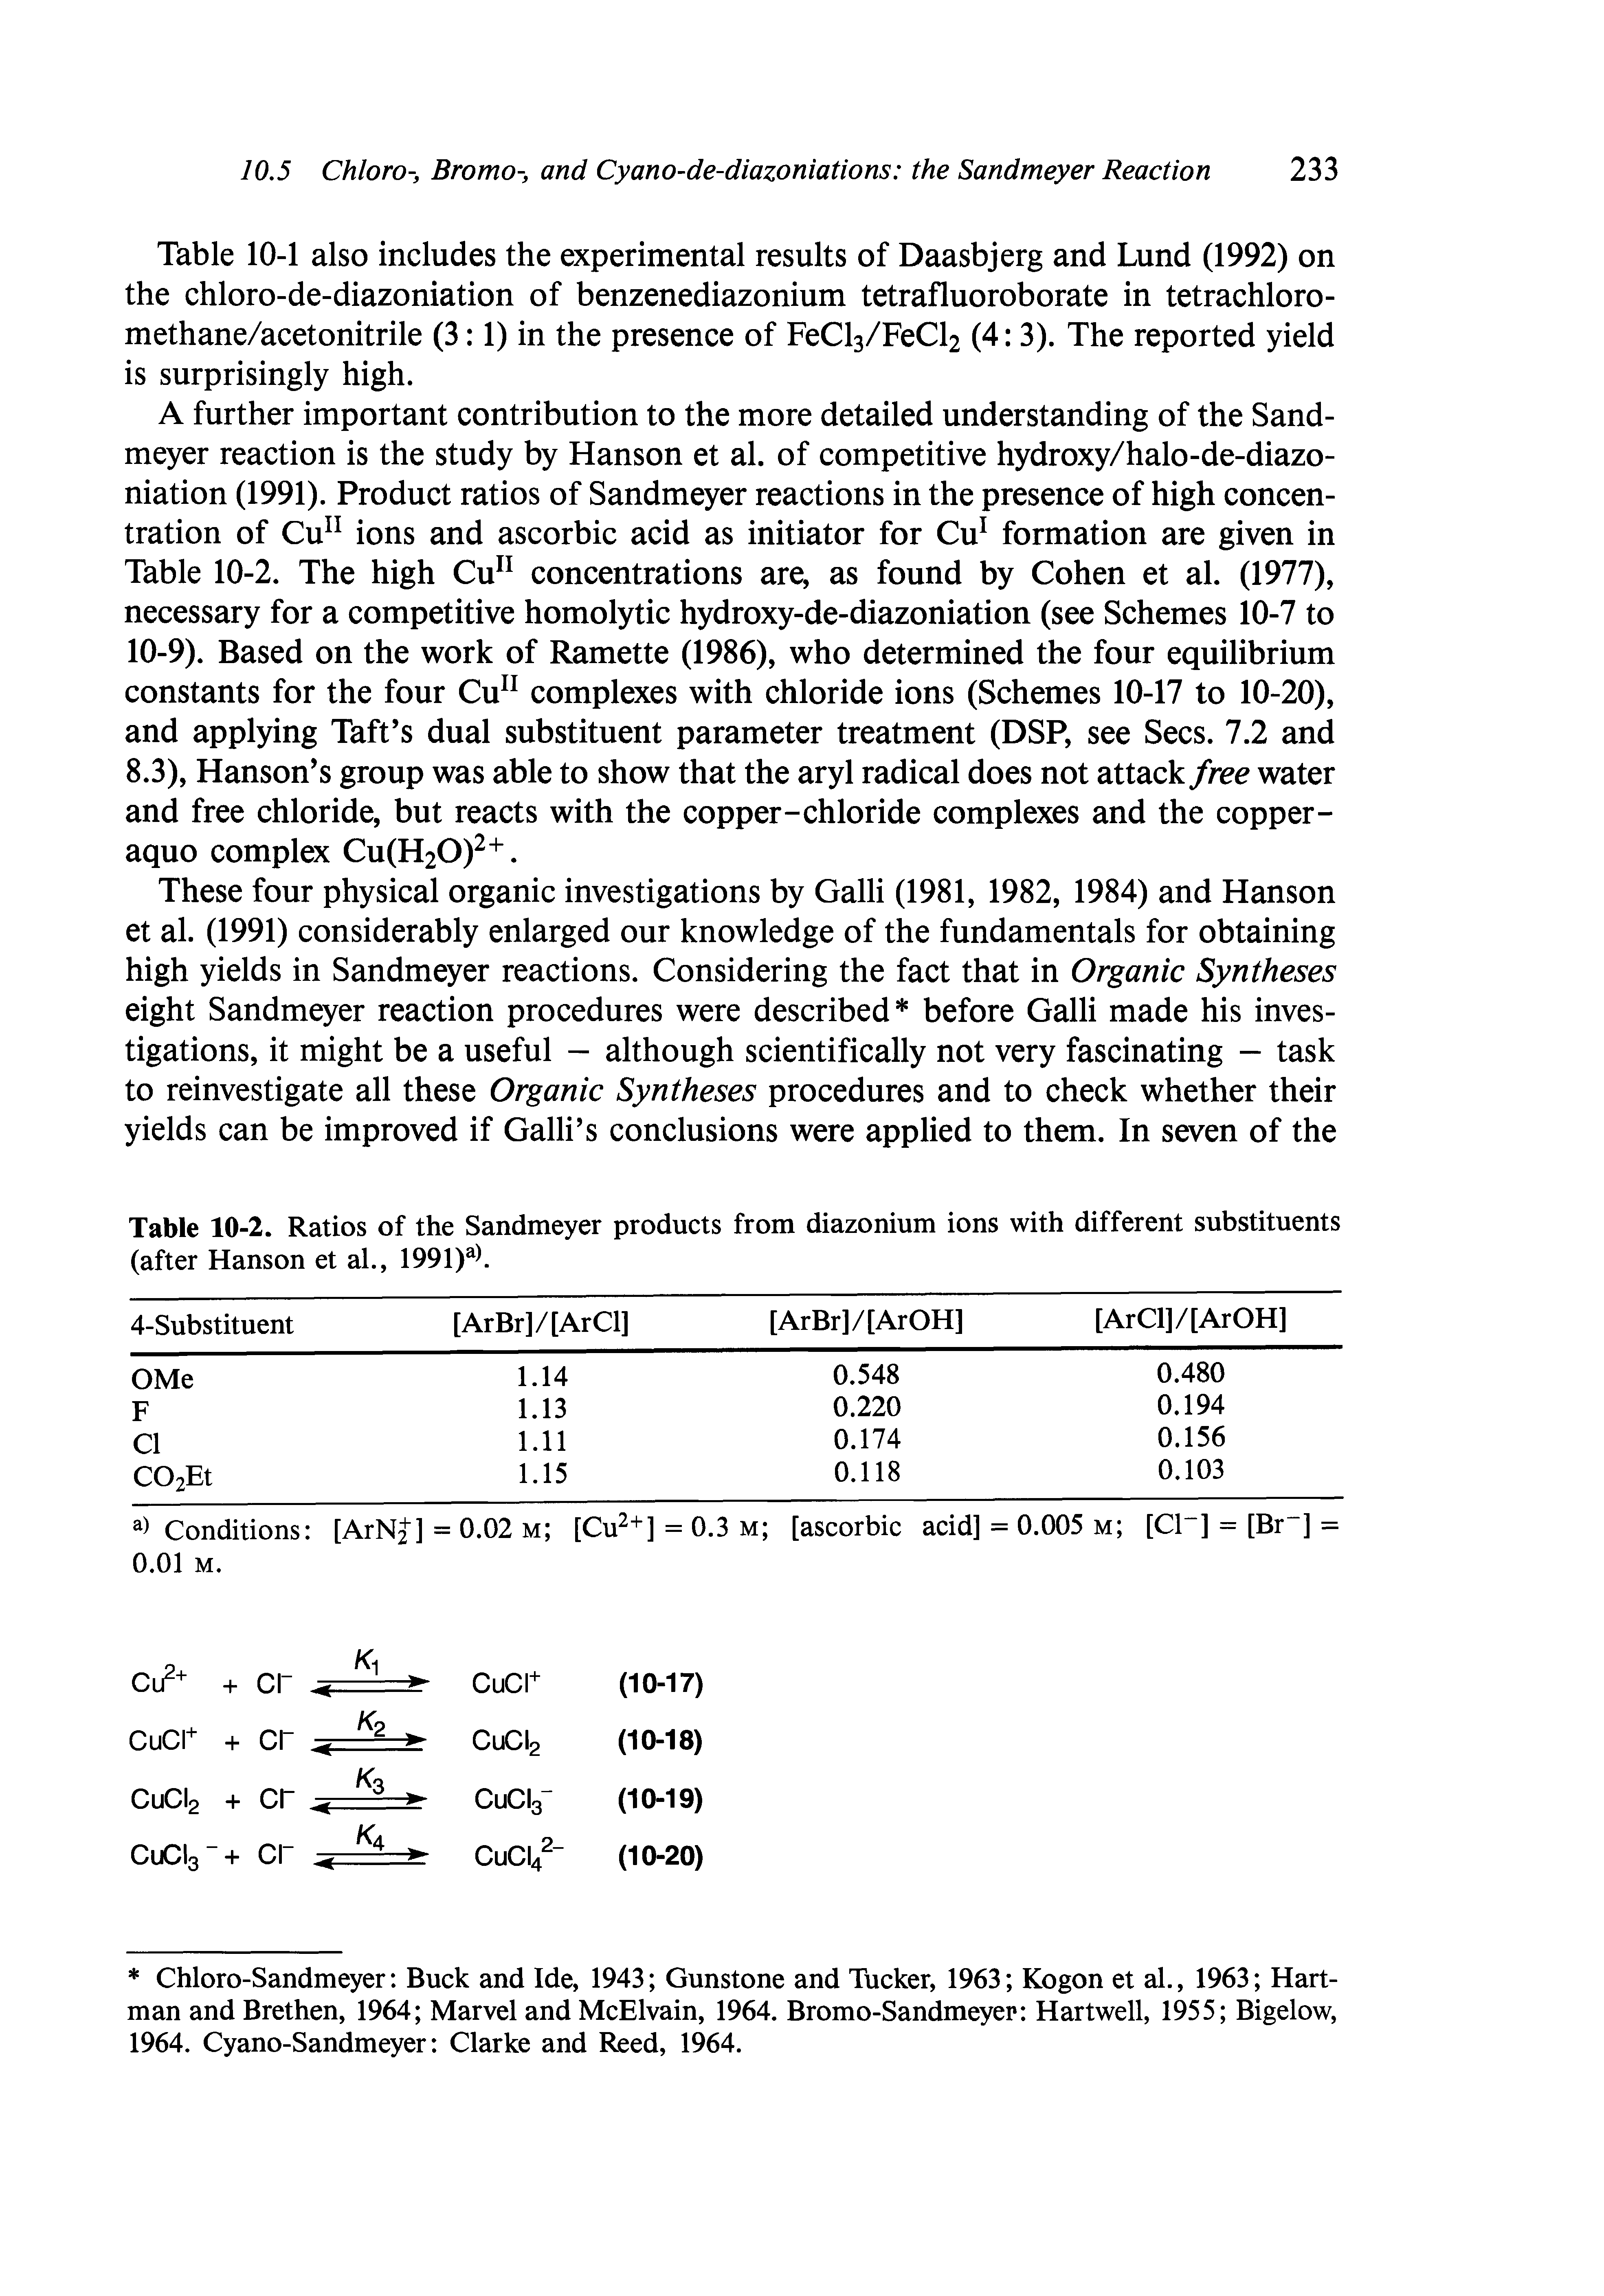 Table 10-2. Ratios of the Sandmeyer products from diazonium ions with different substituents (after Hanson et al., 1991)a).